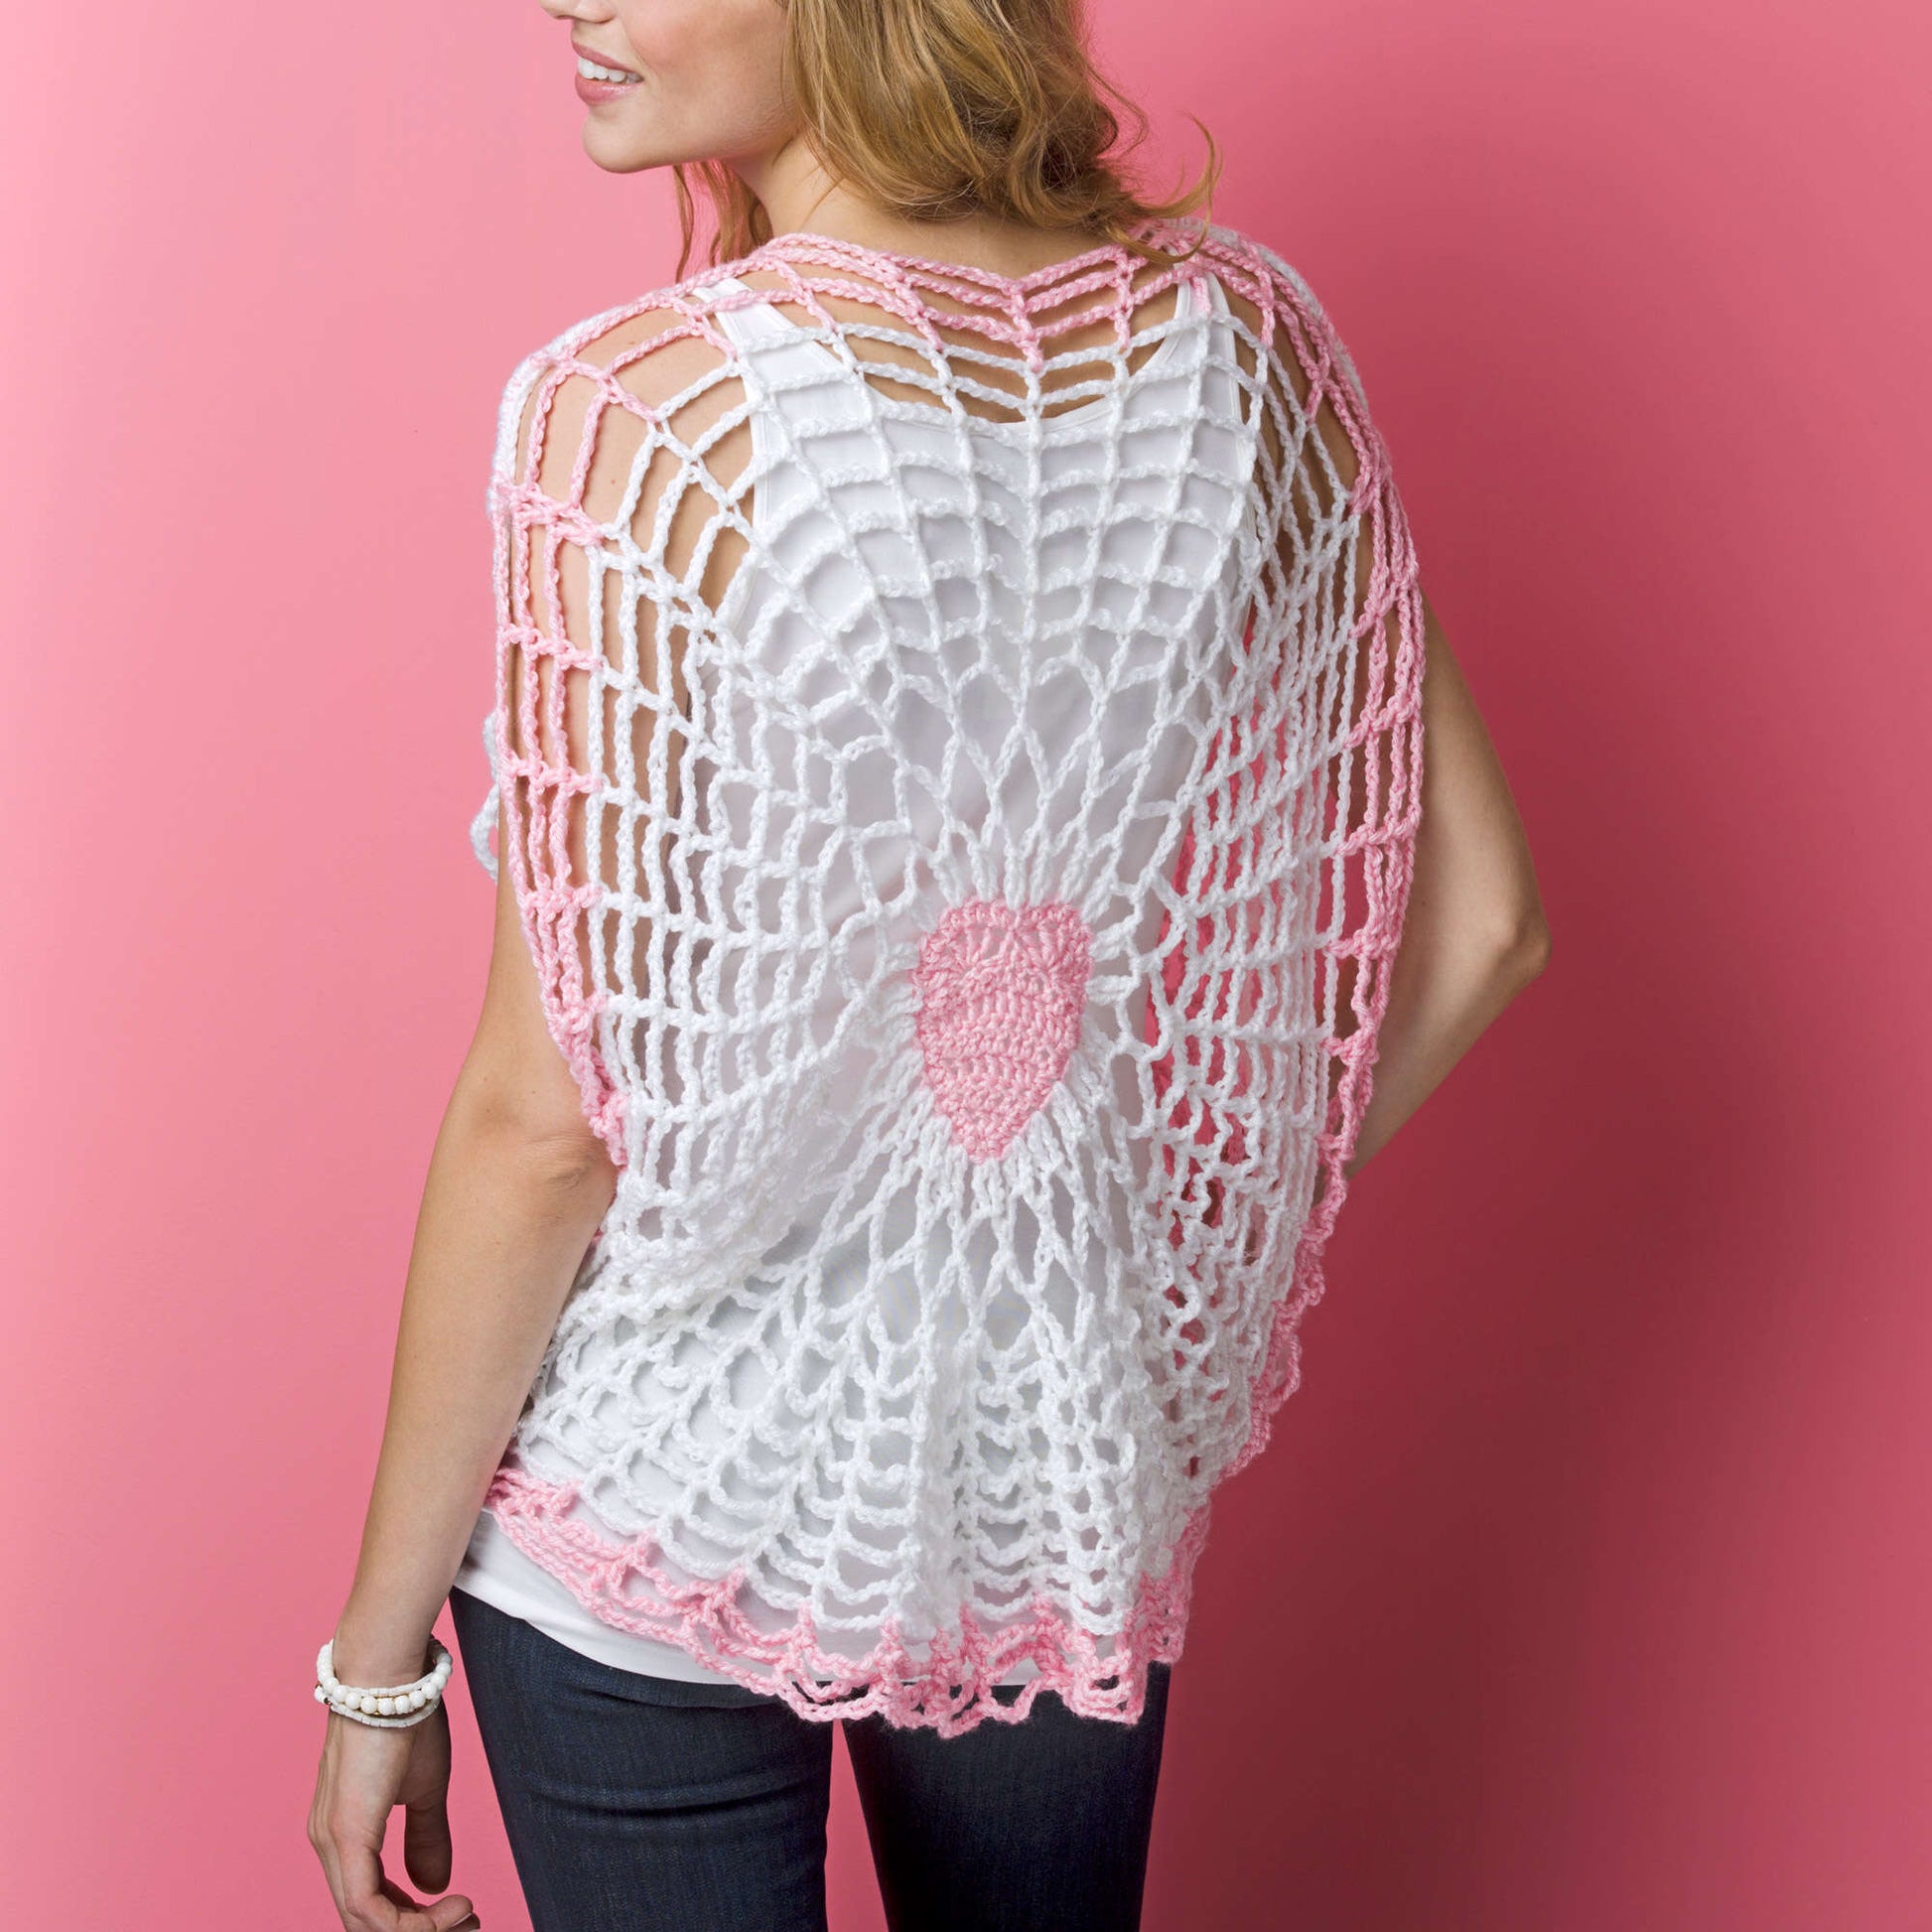 Free Red Heart Lighthearted Tunic Pattern